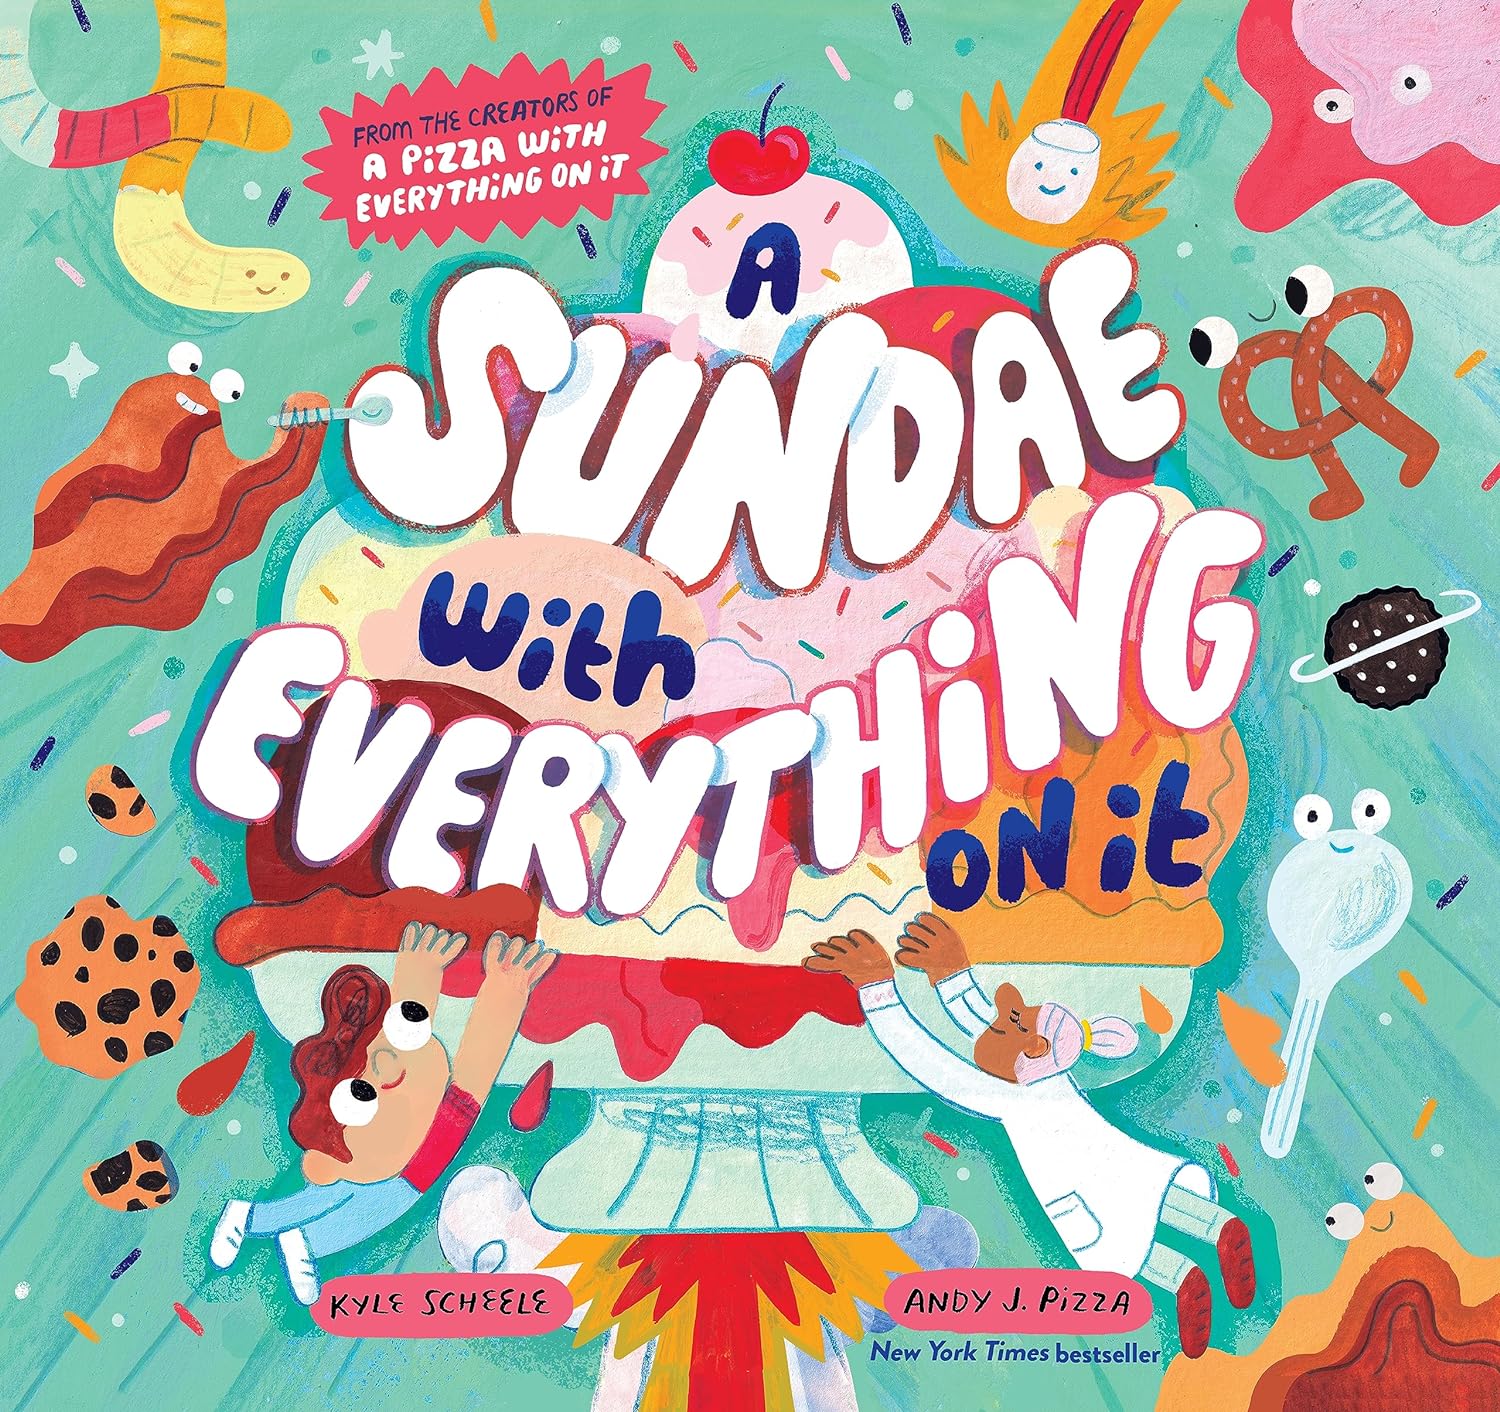 A Sundae with Everything on It (Kyle Scheele (Author), Andy J. Pizza